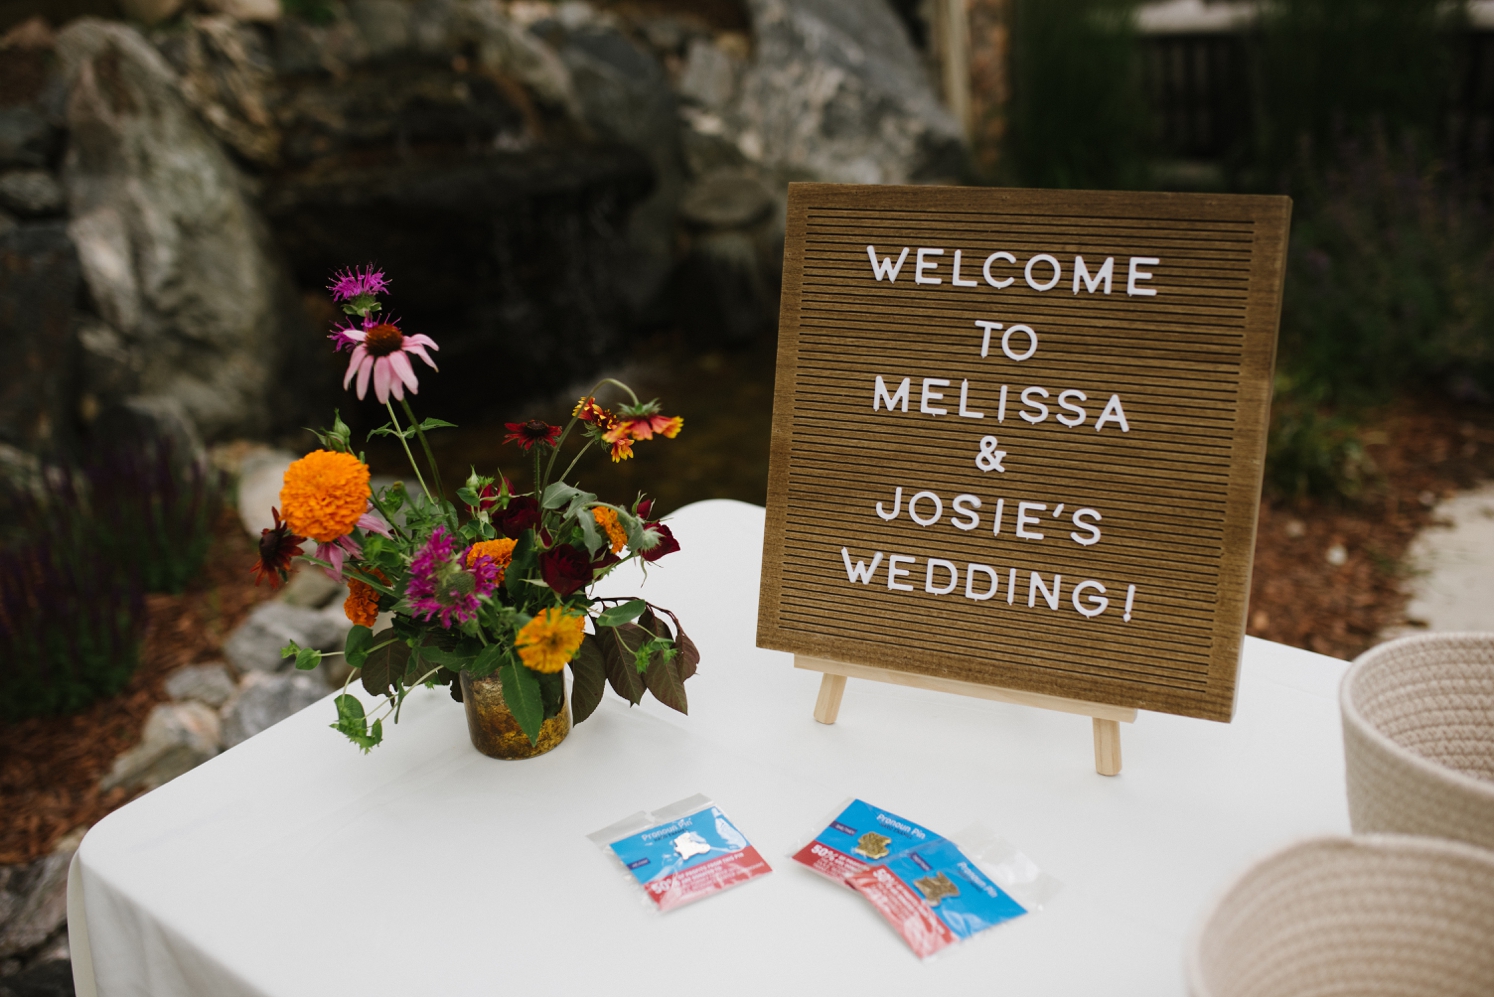 Welcome table with bright flower and pronoun pins at LGBTQ wedding | McArthur Weddings and Events